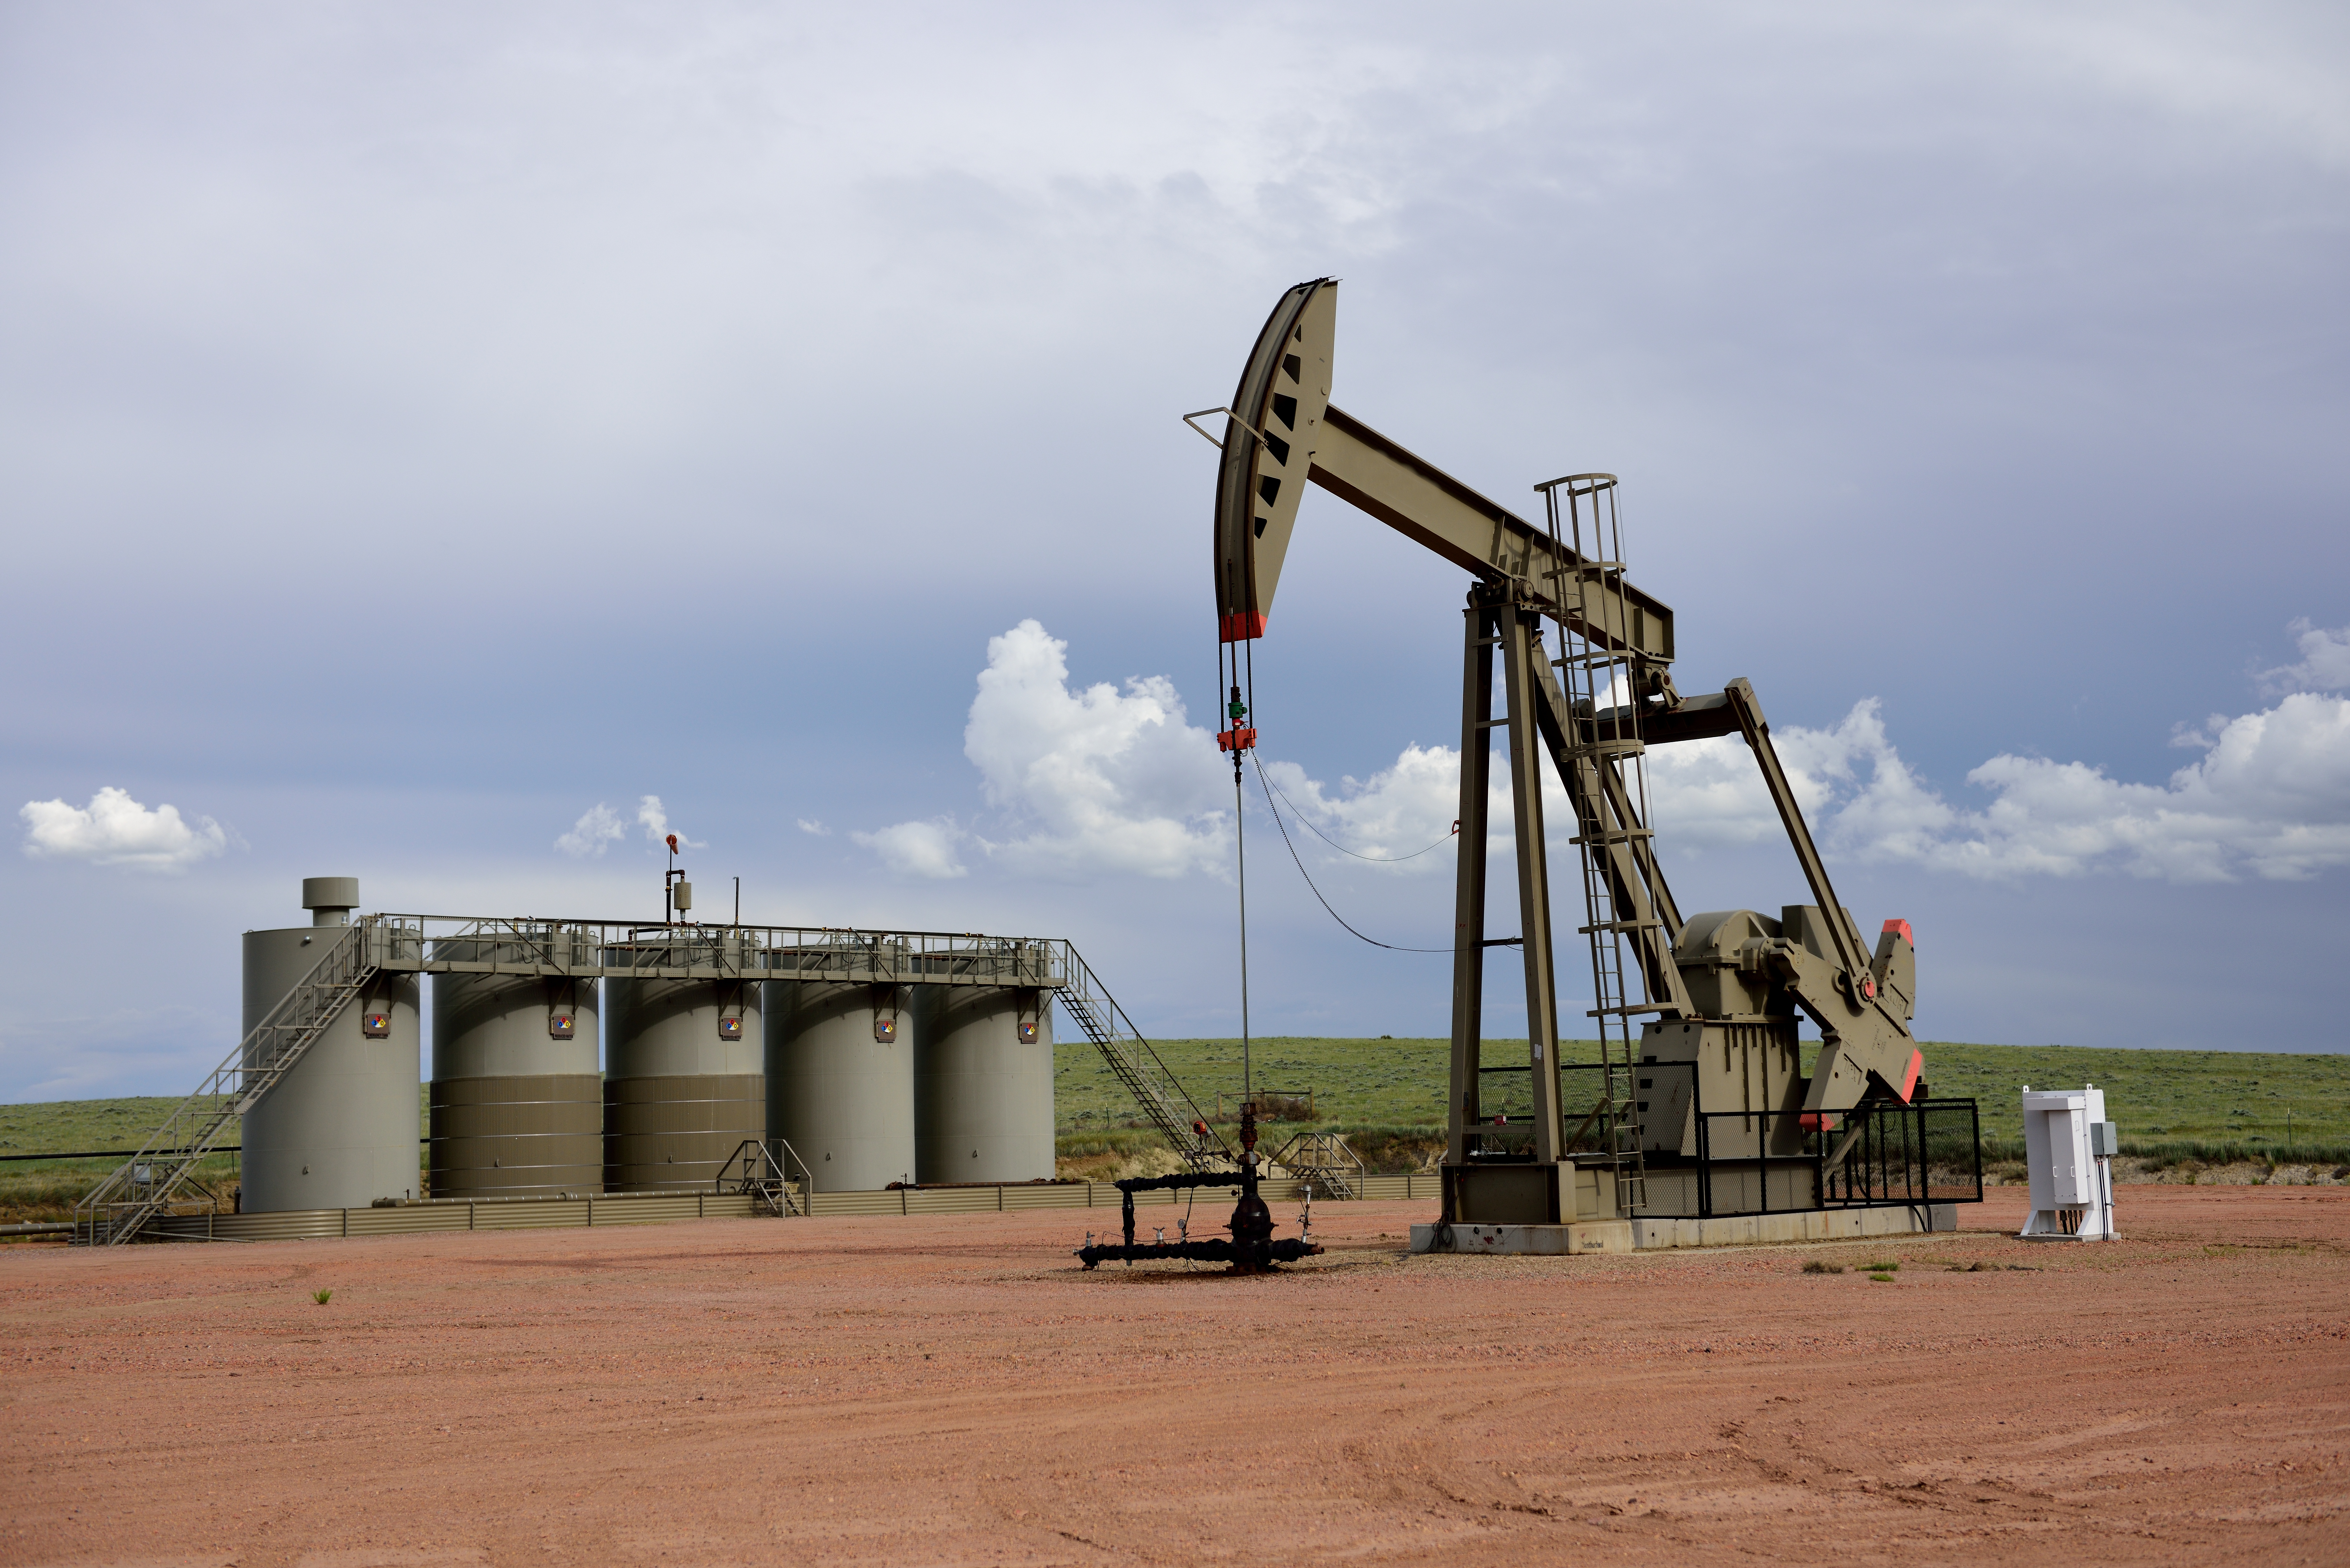 Gas flow sensors help monitor flow at both high and low velocities, making them ideally suited for vent gas monitoring at oil and gas well sites.
